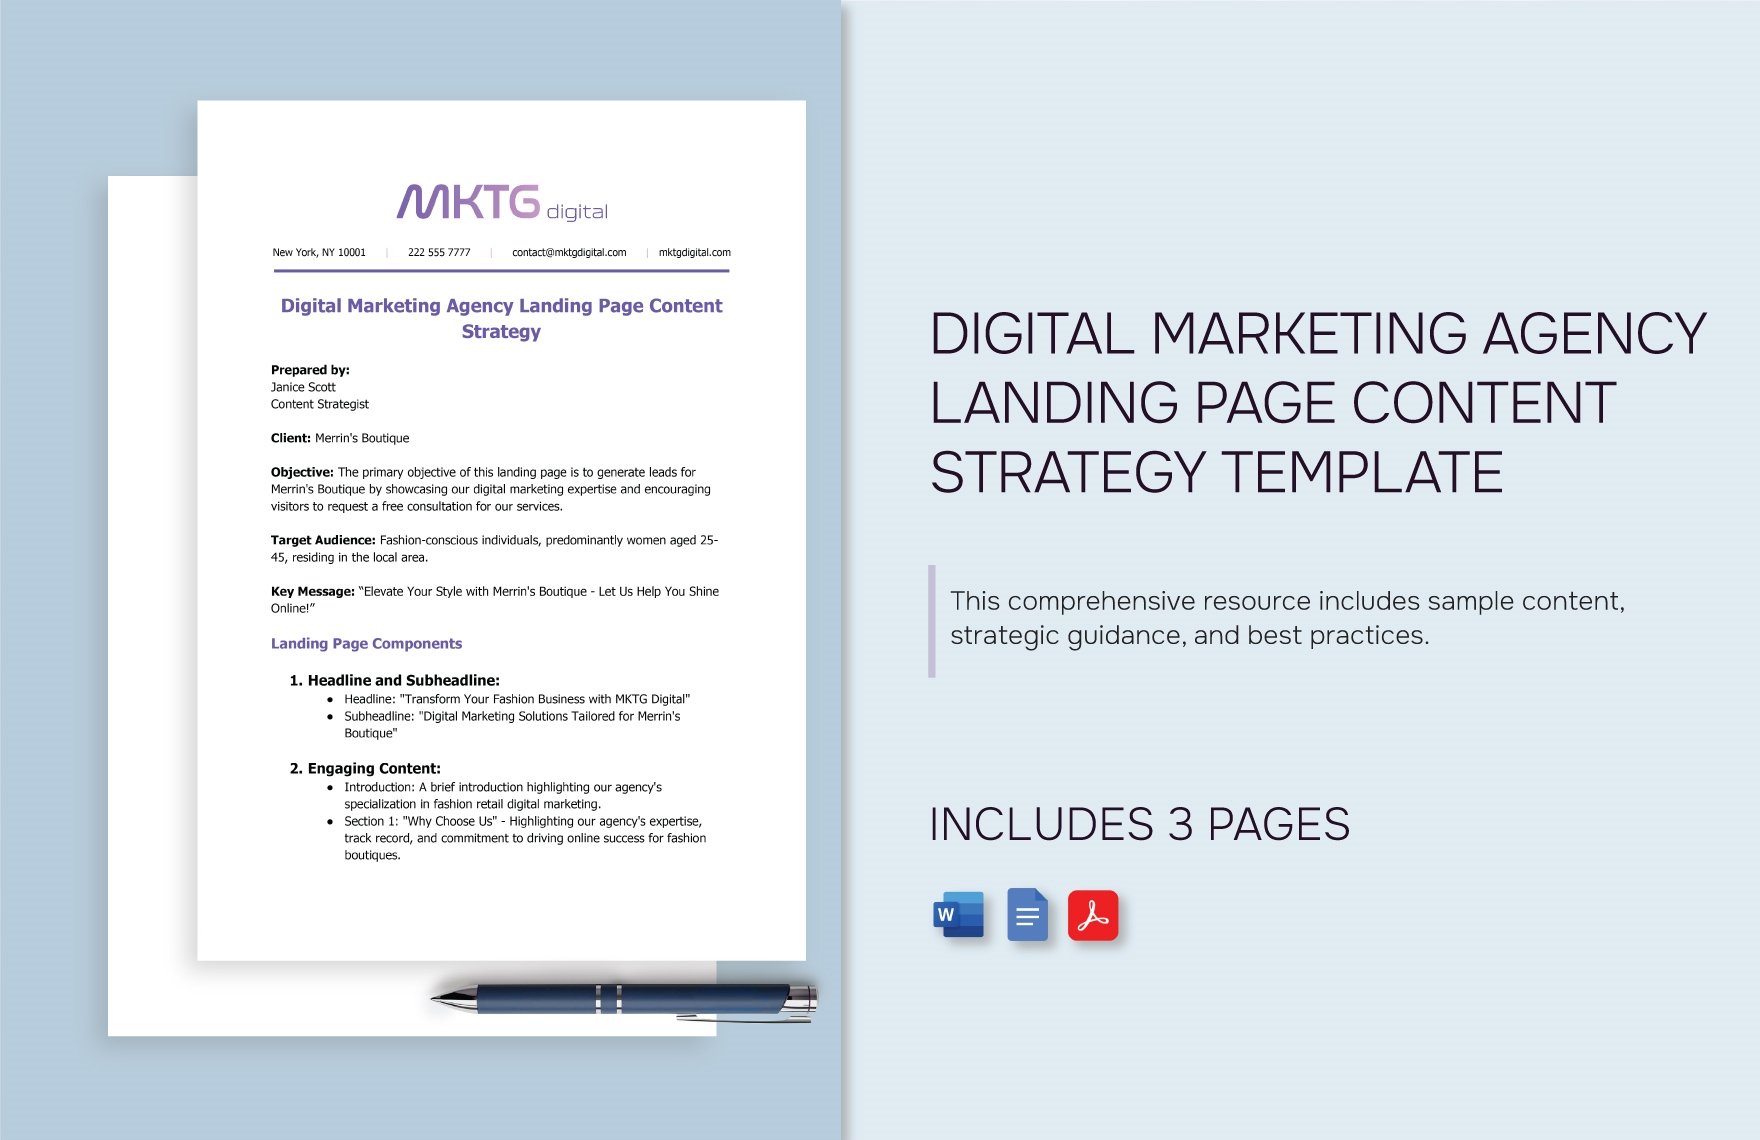 Digital Marketing Agency Landing Page Content Strategy Template in Word, Google Docs, PDF